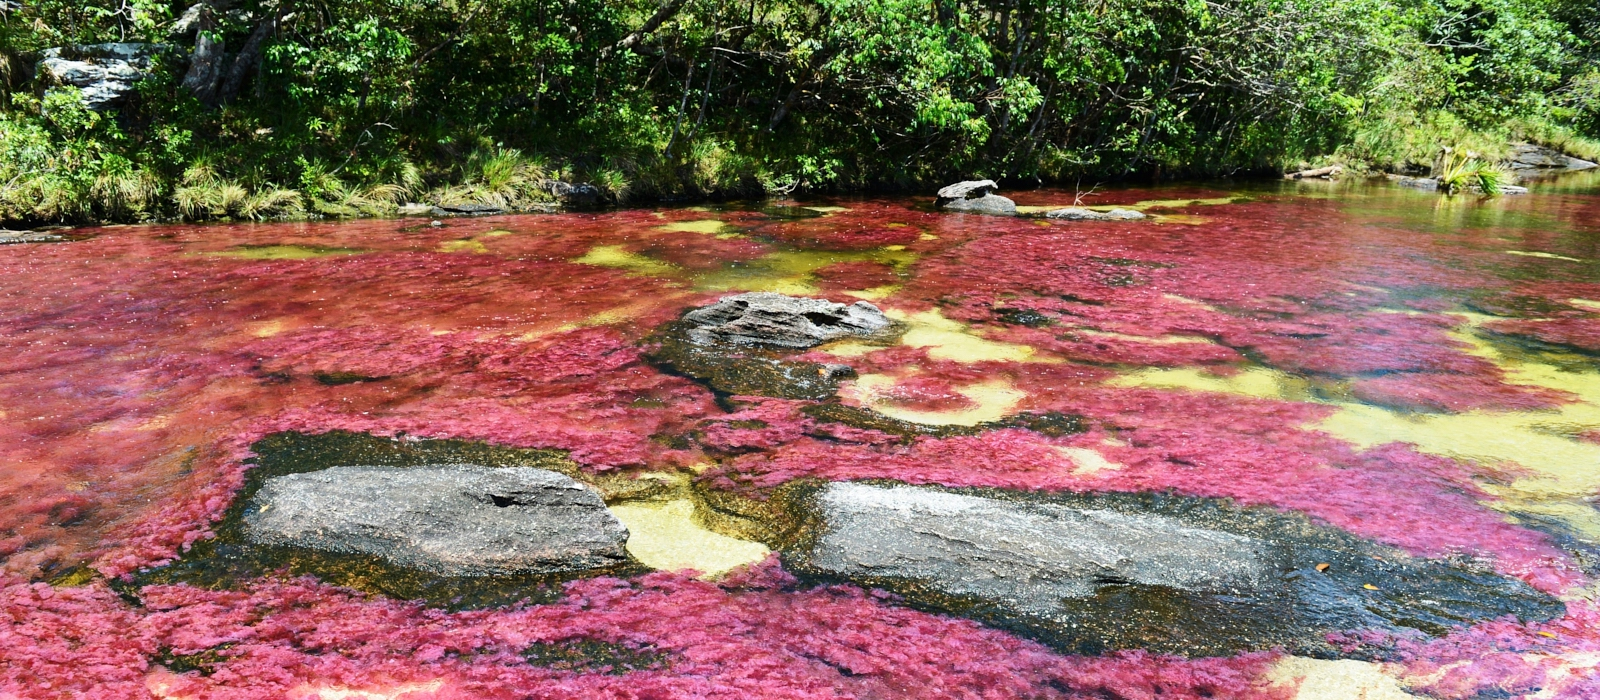 4 DAY CAÑO CRISTALES ADD-ON